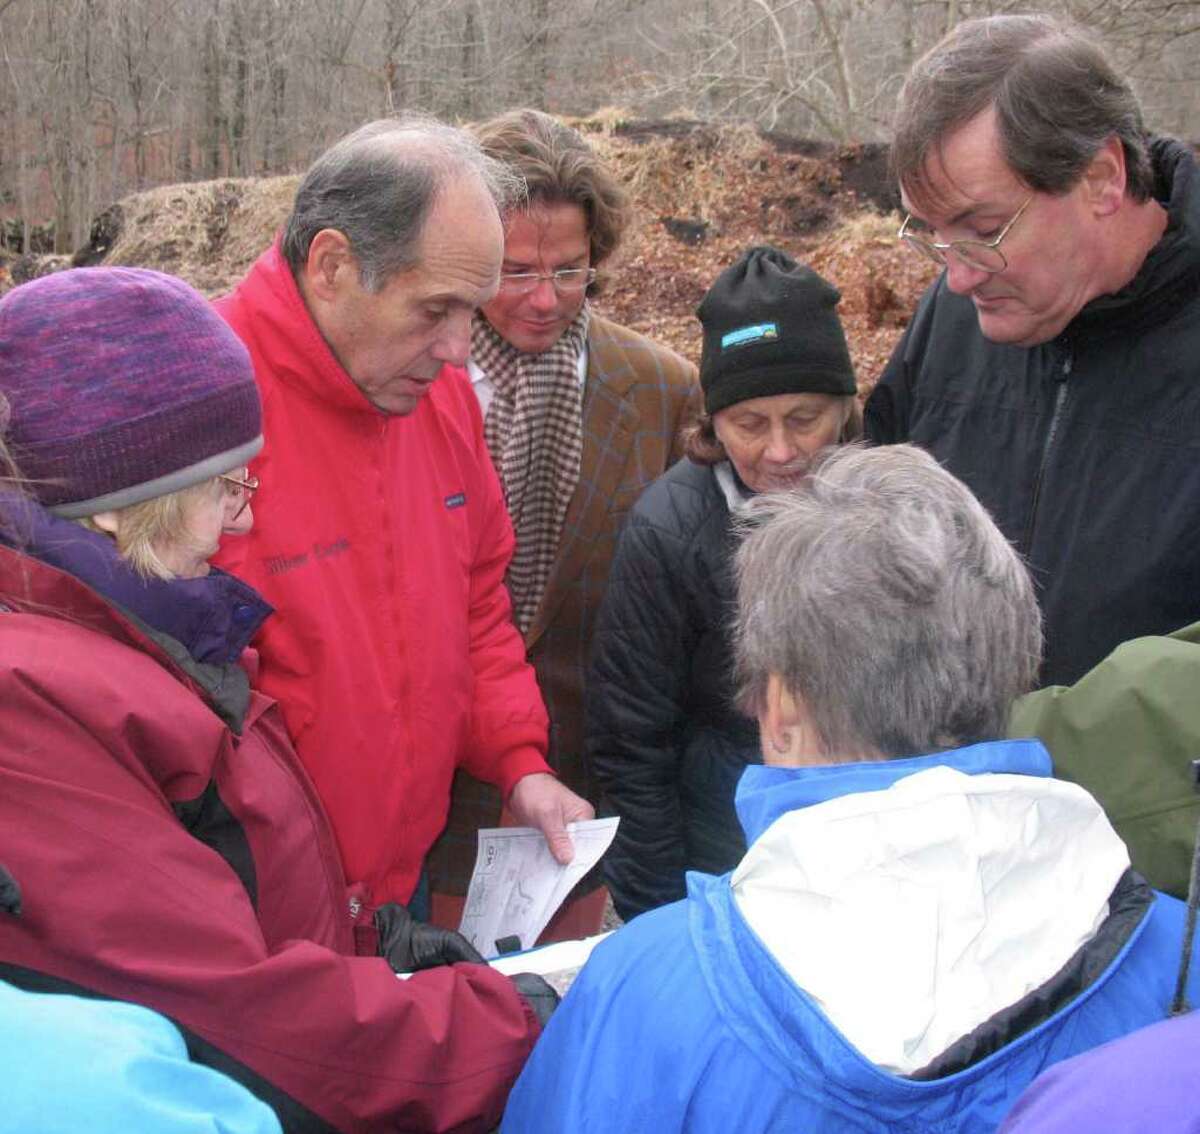 Conservation Commission Director Denise Savageau, at left, holds a map of the area where a cell tower may be placed at 129 Bible St., in the Montgomery Pinetum, on Monday. With her from left are Conservation Commission members Gary Silberberg, anti-cell tower activist Wayne Jervis, and commission members Lisette Henrey, Eric Brower and with back to camera, Sue Baker. (Photo by Frank MacEachern/staff)